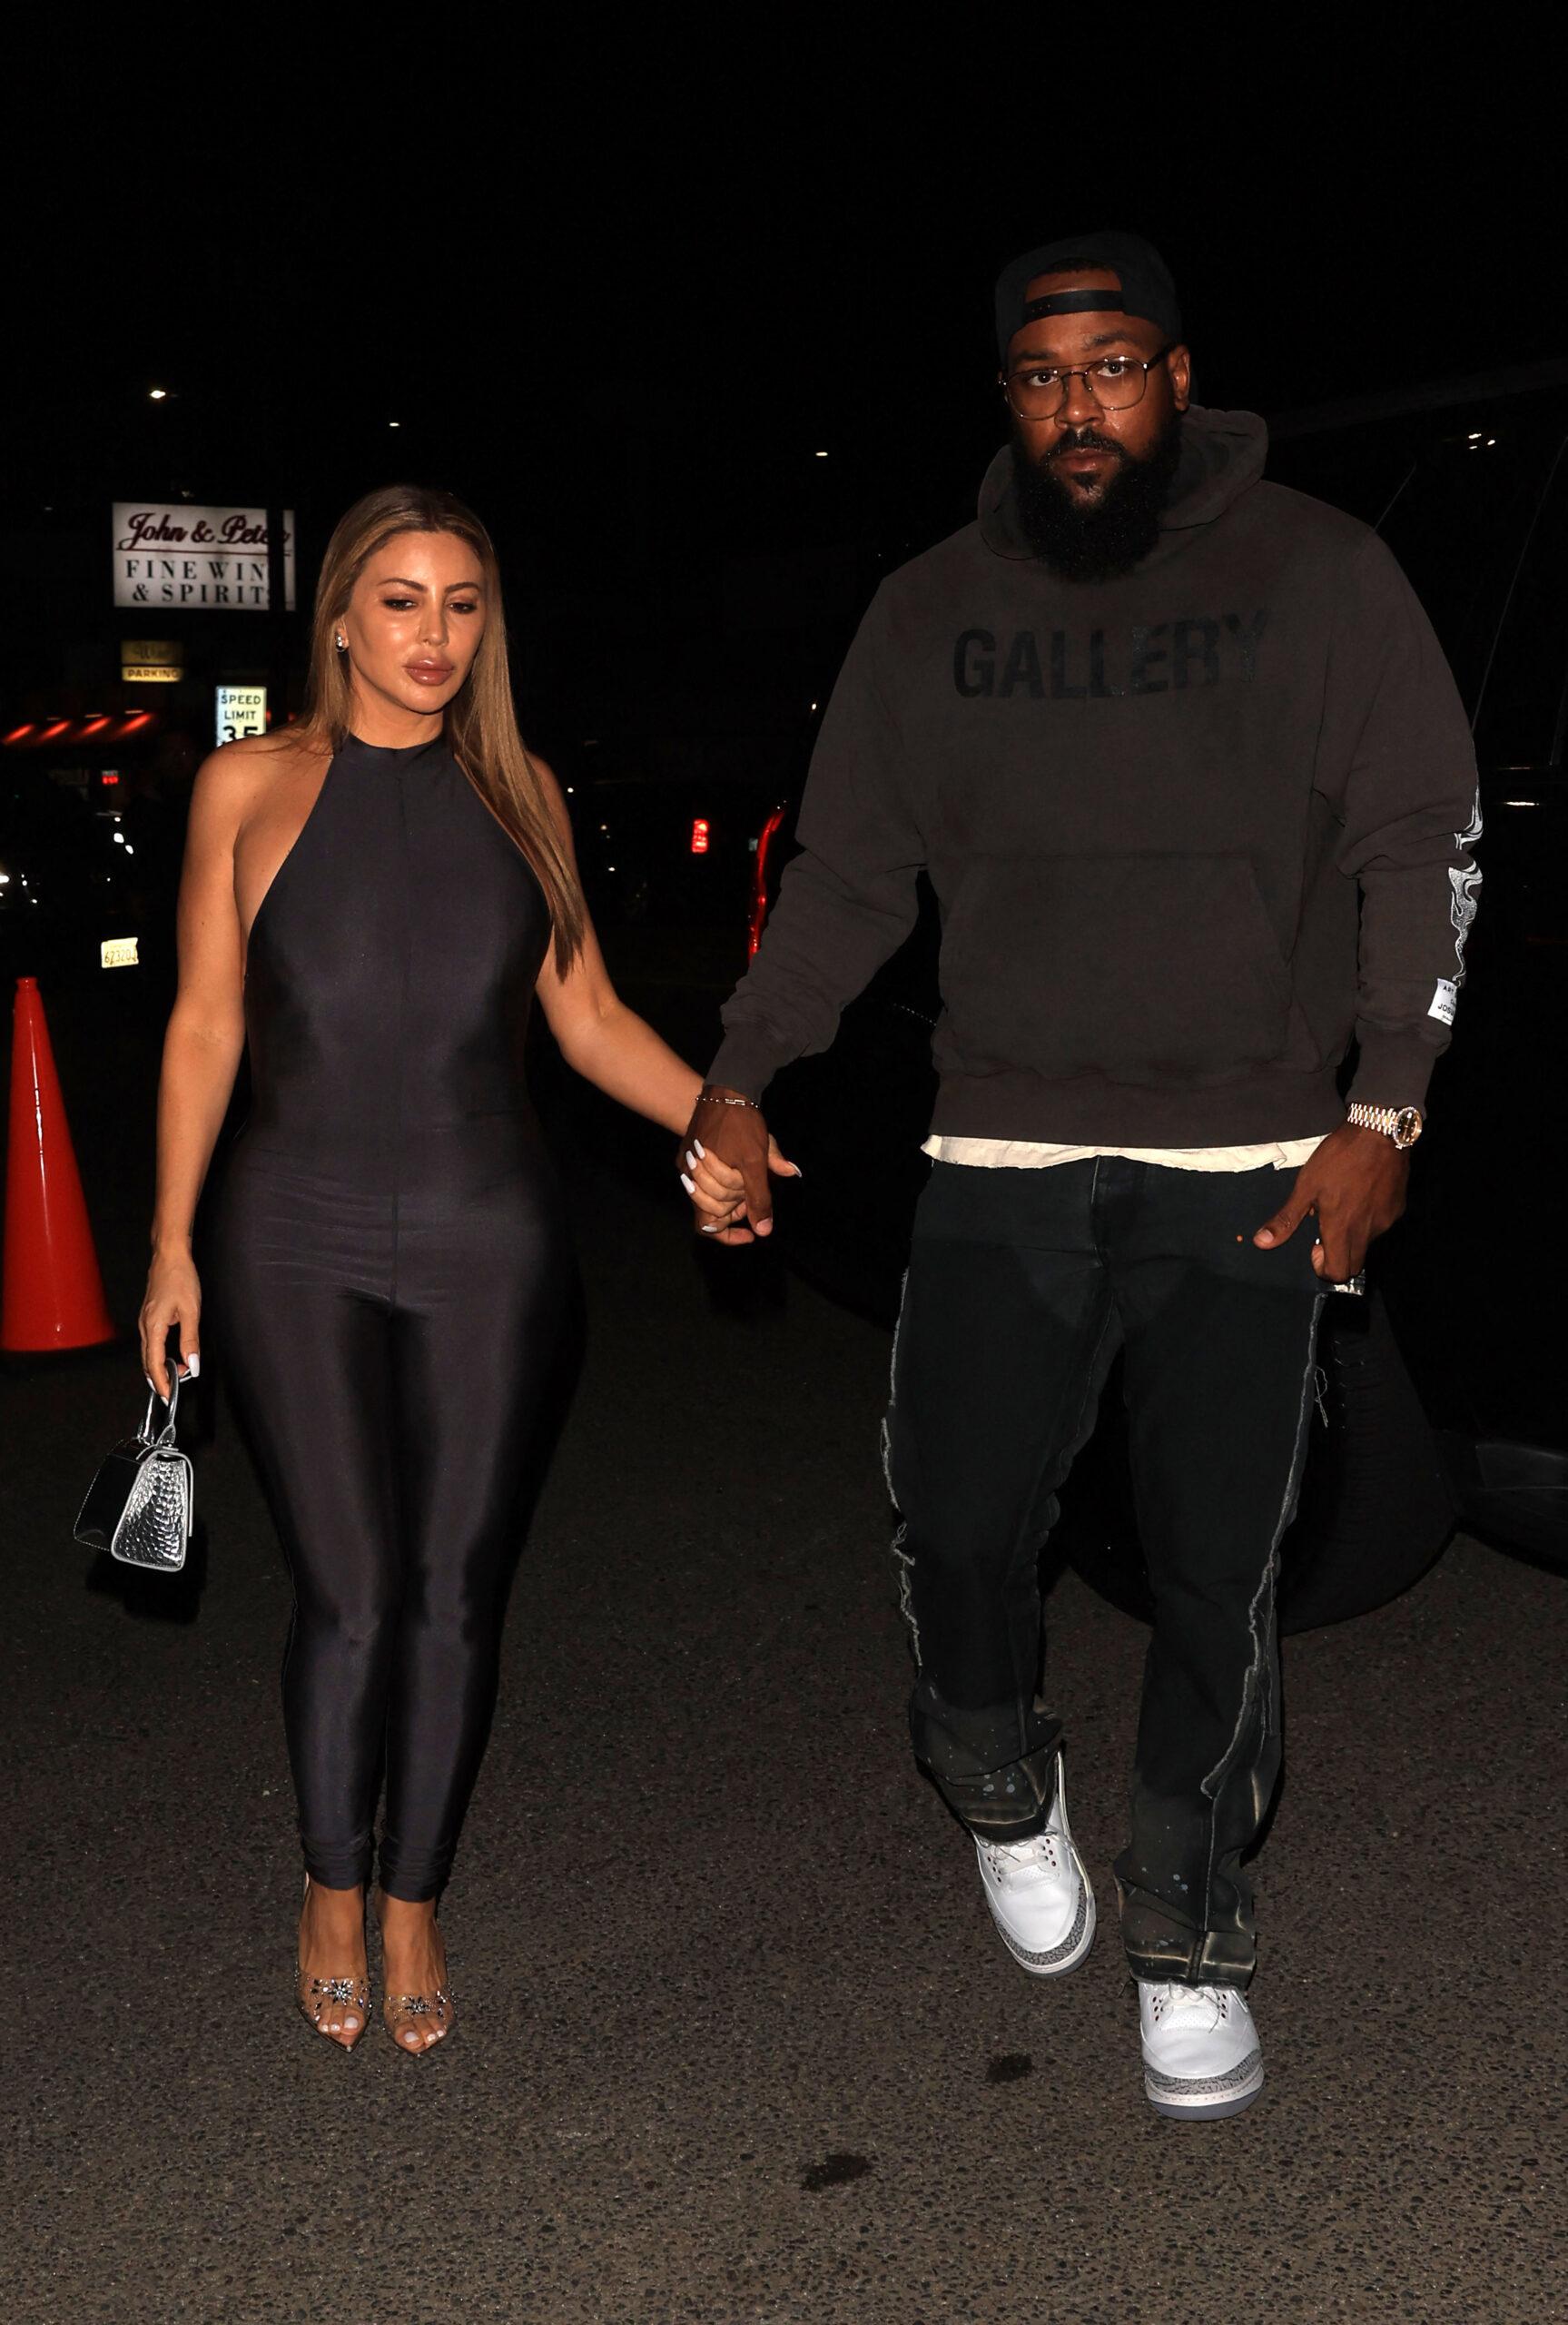 Larsa Pippen & Marcus Jordan Address Backlash Over Their 16-Year Age Gap: 'Age Is Just A Number'